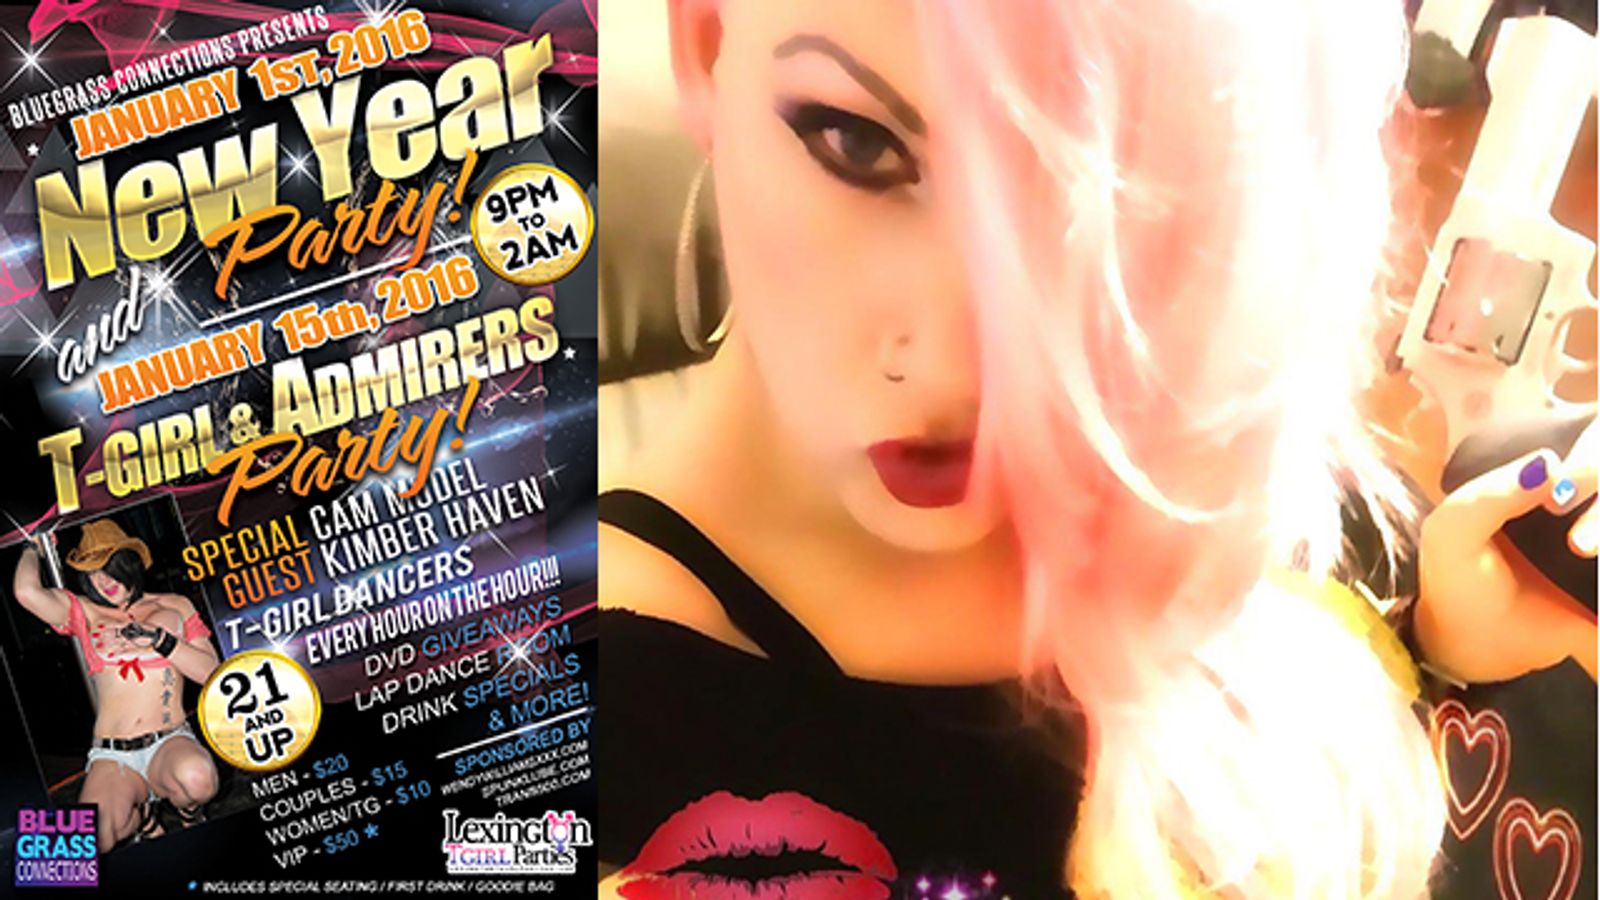 Kimber Haven to Host T-Girl & Admirers Party January 15 In KY